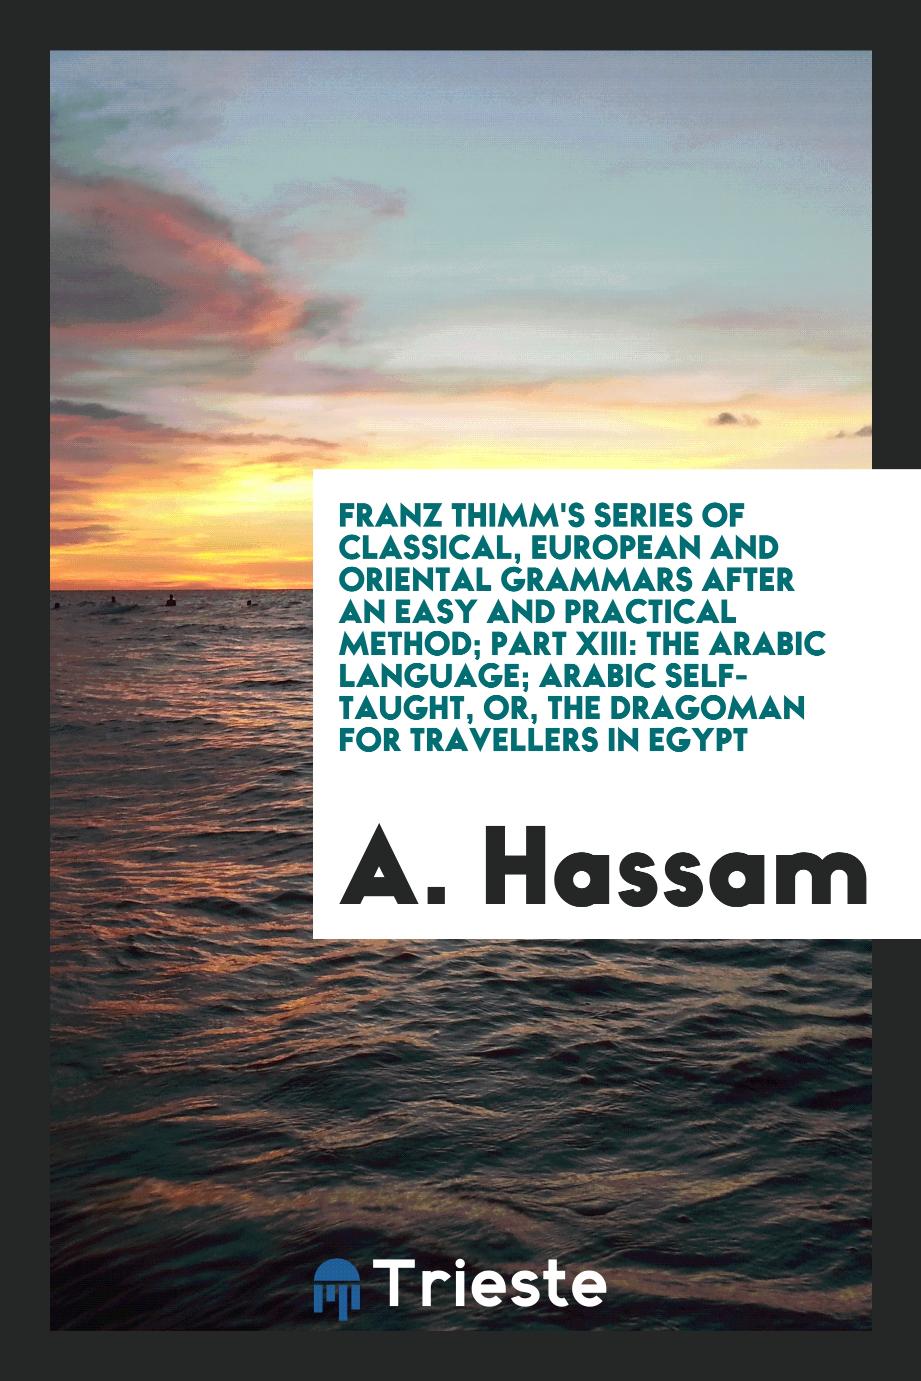 Franz Thimm's Series of Classical, European and Oriental Grammars After an Easy and Practical Method; Part XIII: The Arabic Language; Arabic Self-Taught, or, the Dragoman for Travellers in Egypt